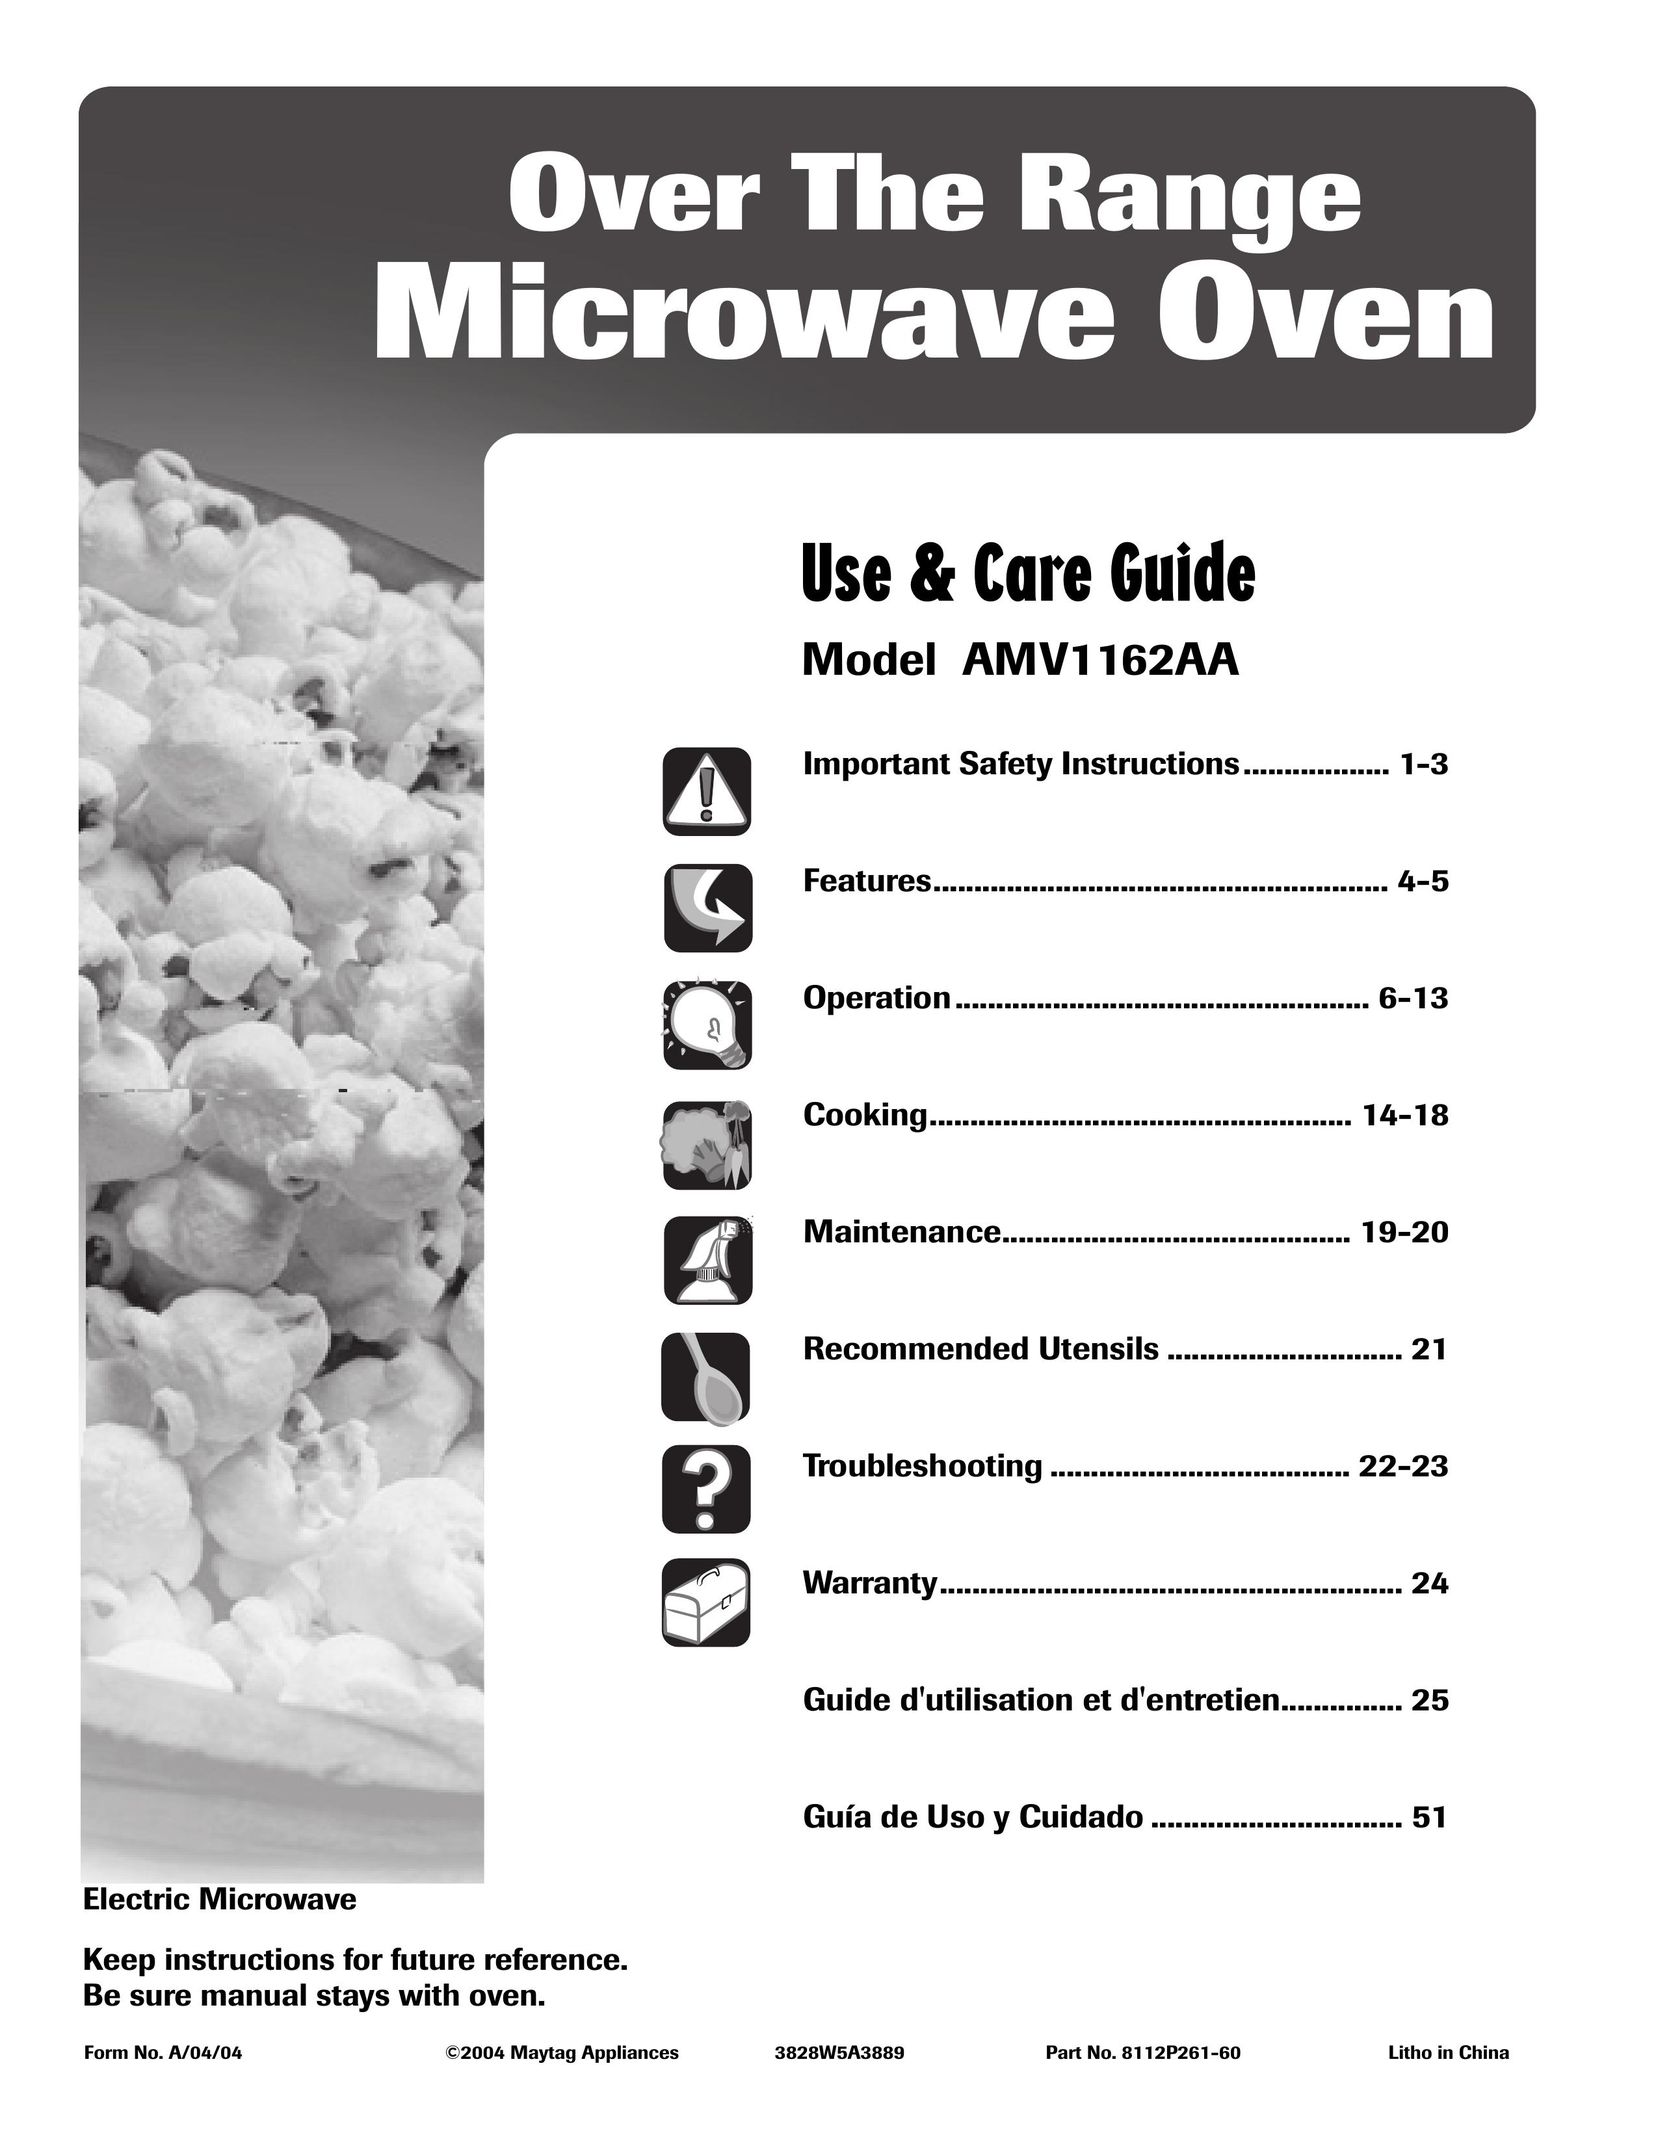 Maytag AMV1162AA Microwave Oven User Manual